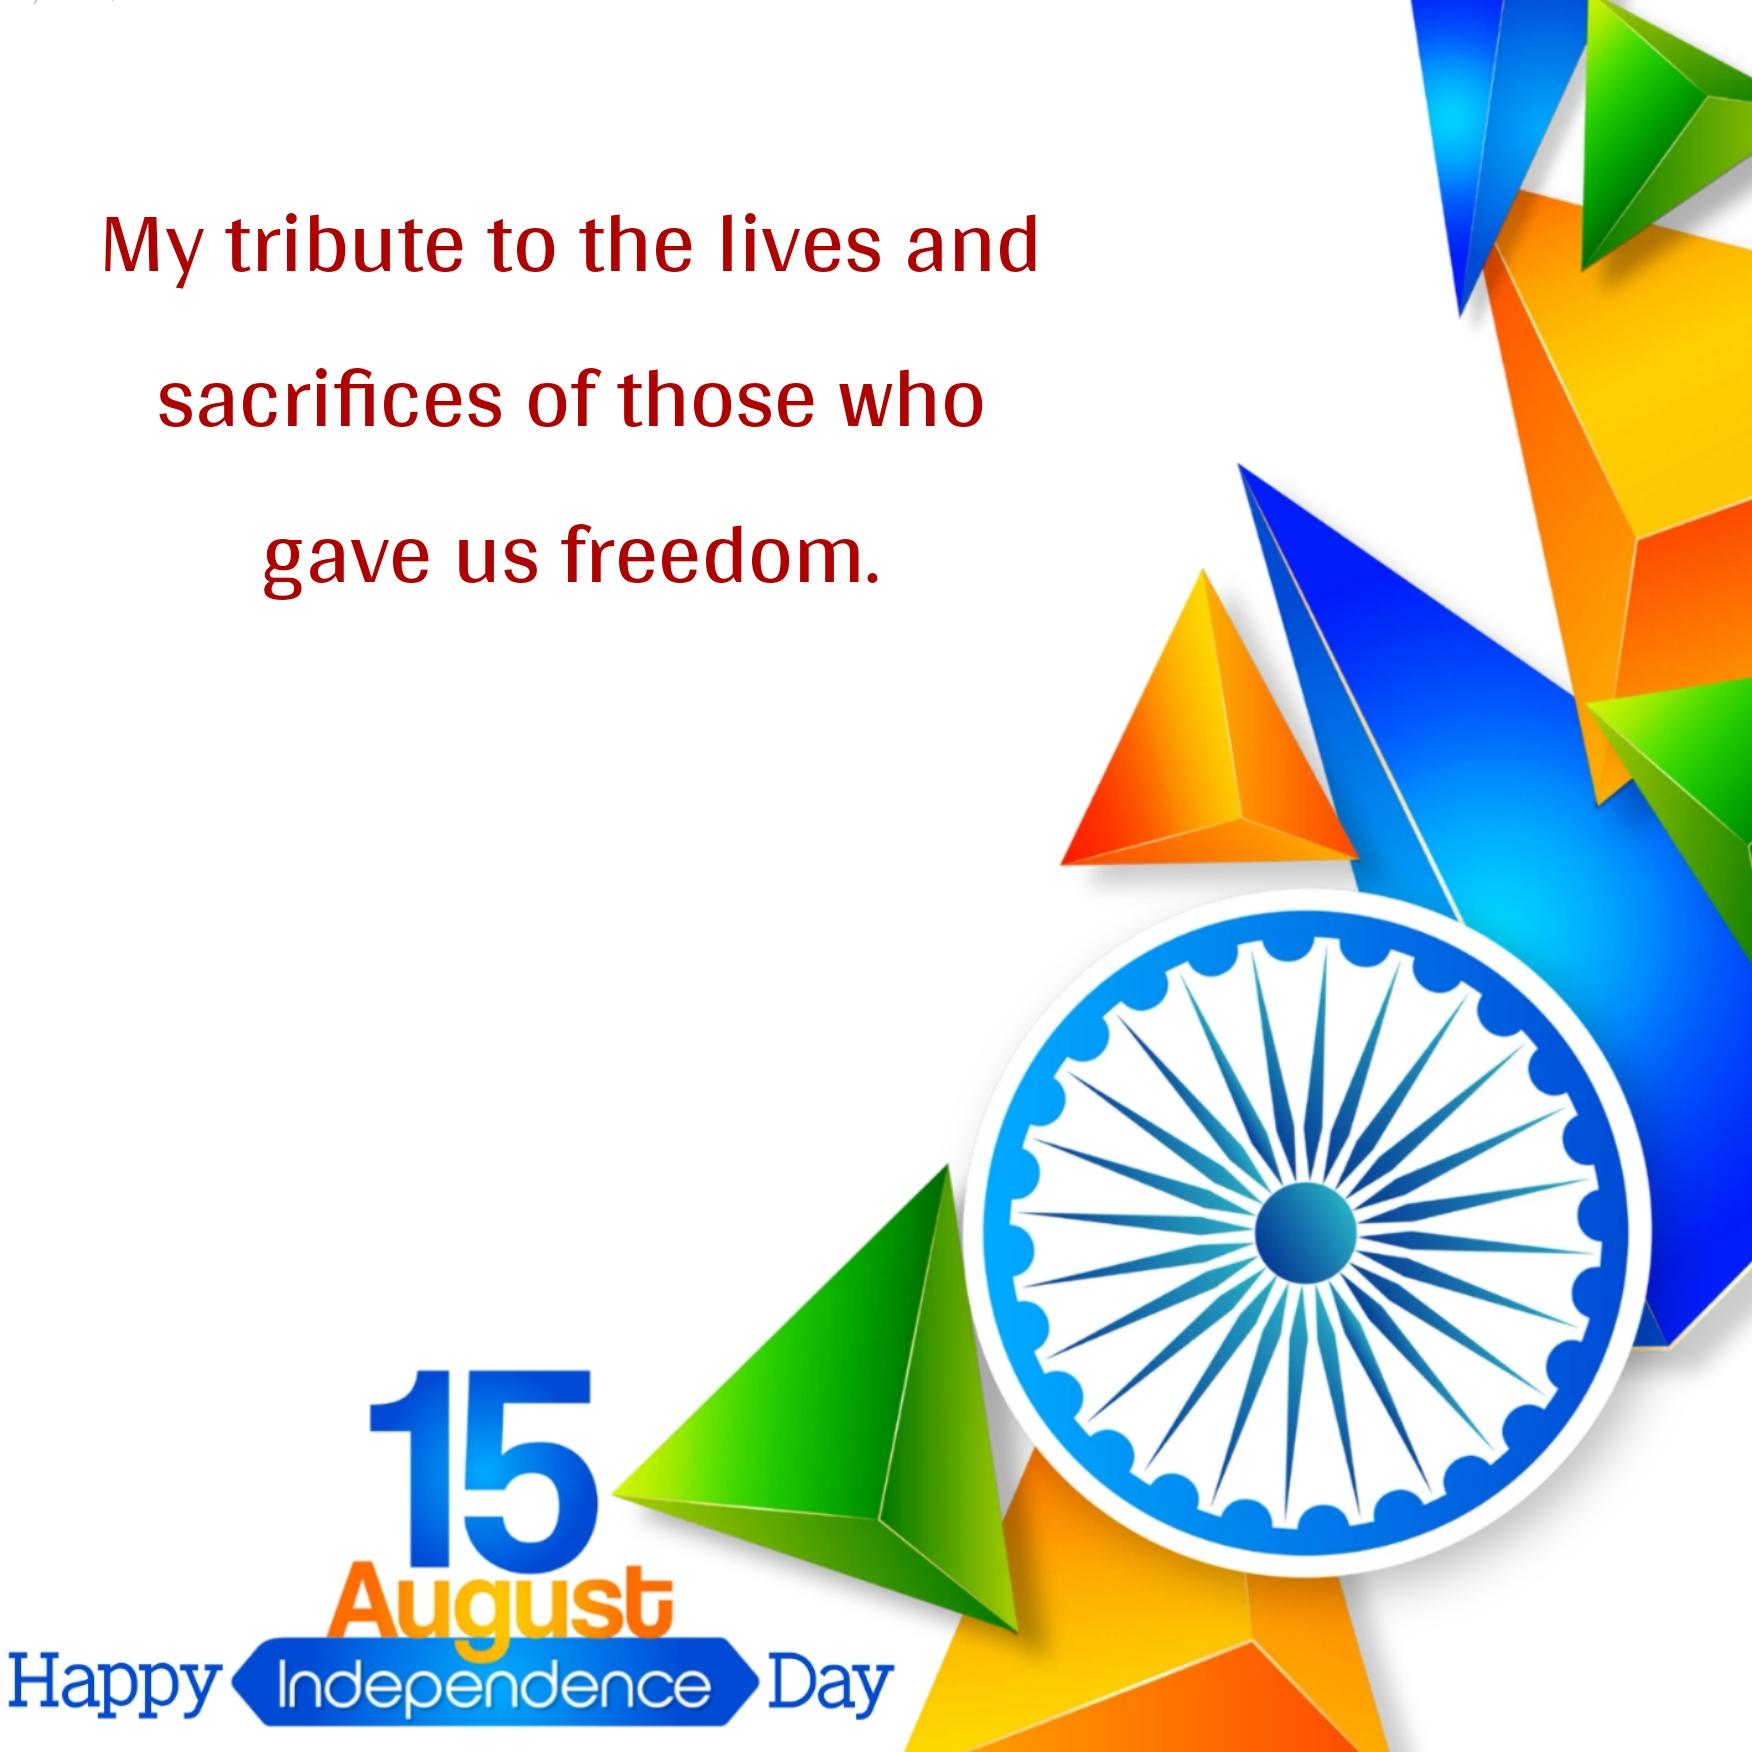 My tribute to the lives and sacrifices of those who gave us freedom